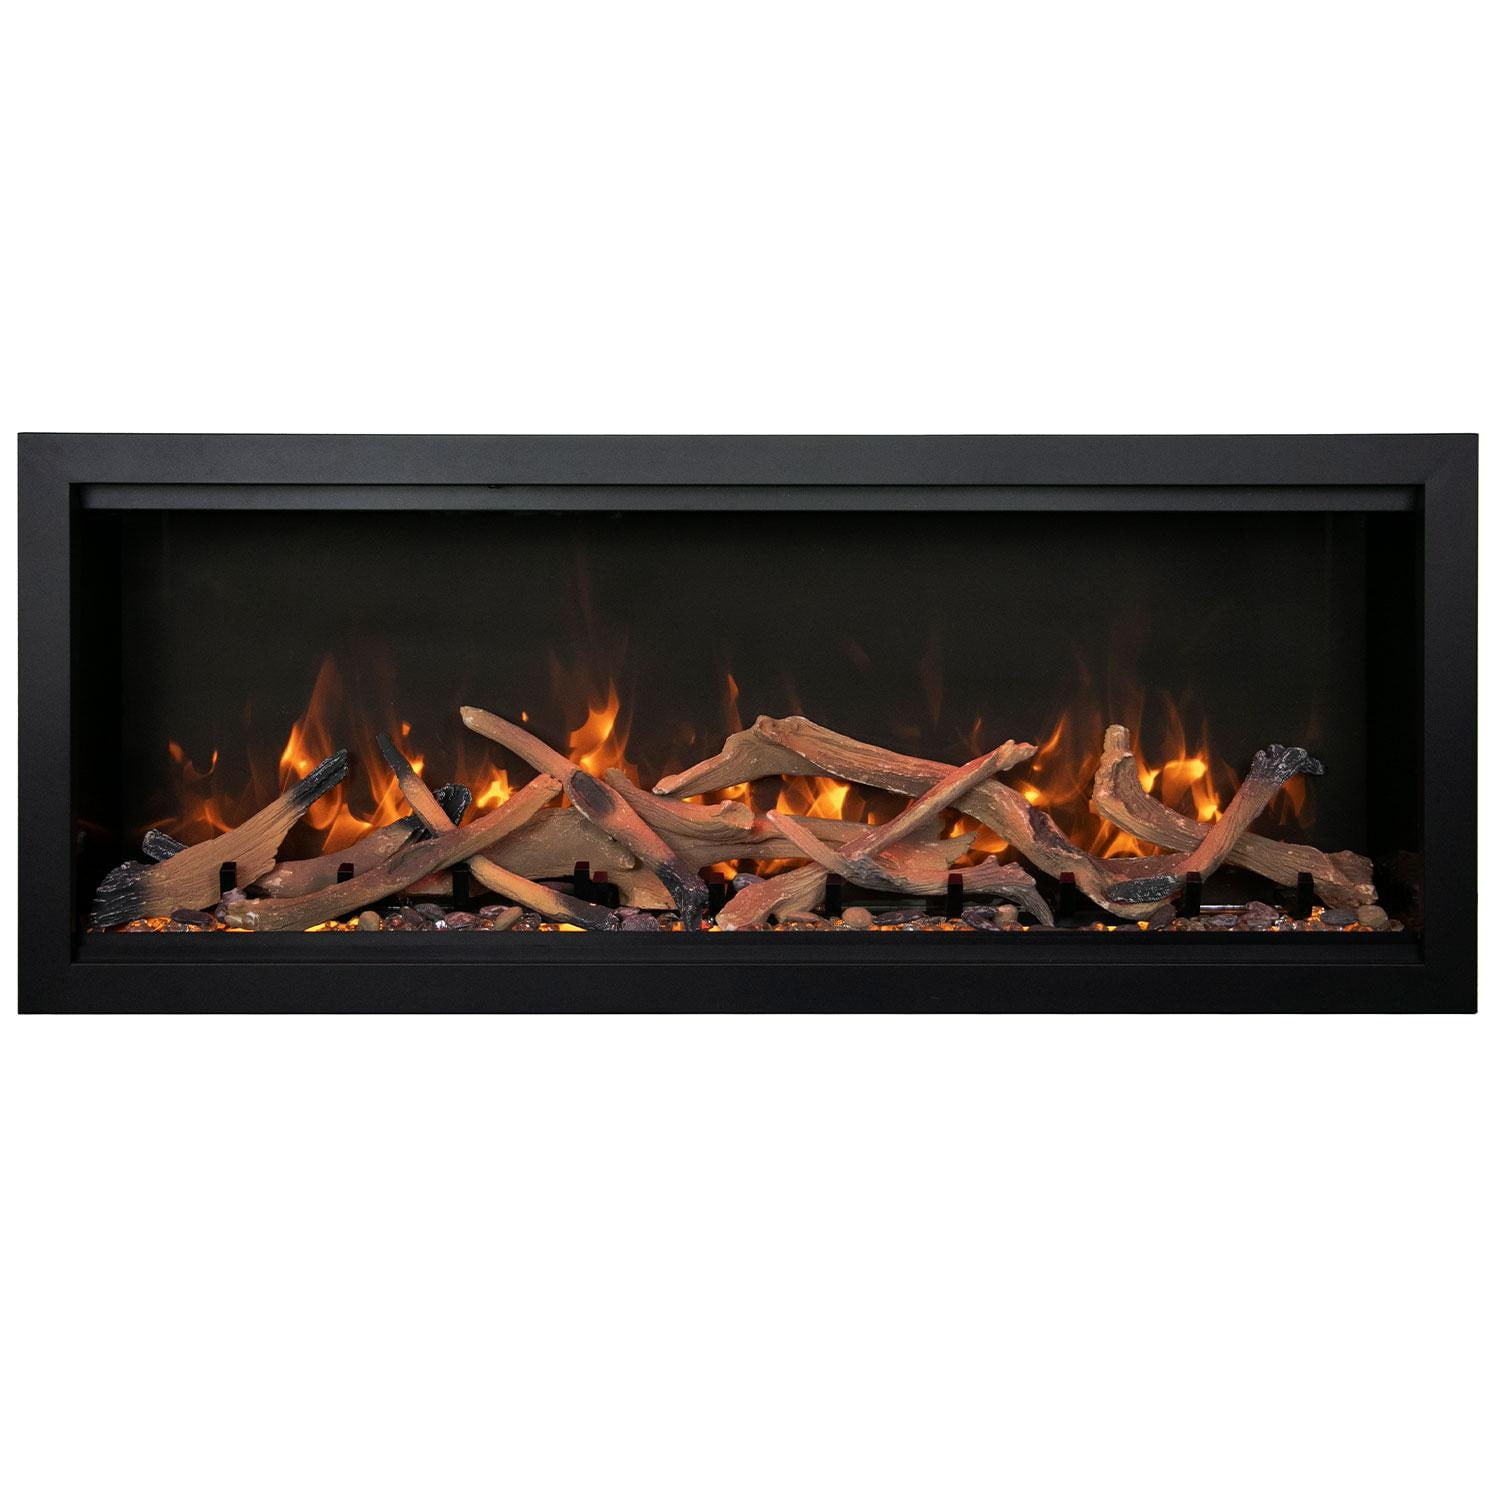 Amantii SYM-74-XT-BESPOKE 74 in. Thermostatic Remote Electric Fireplace with Symmetry Xtra Tall Bespoke